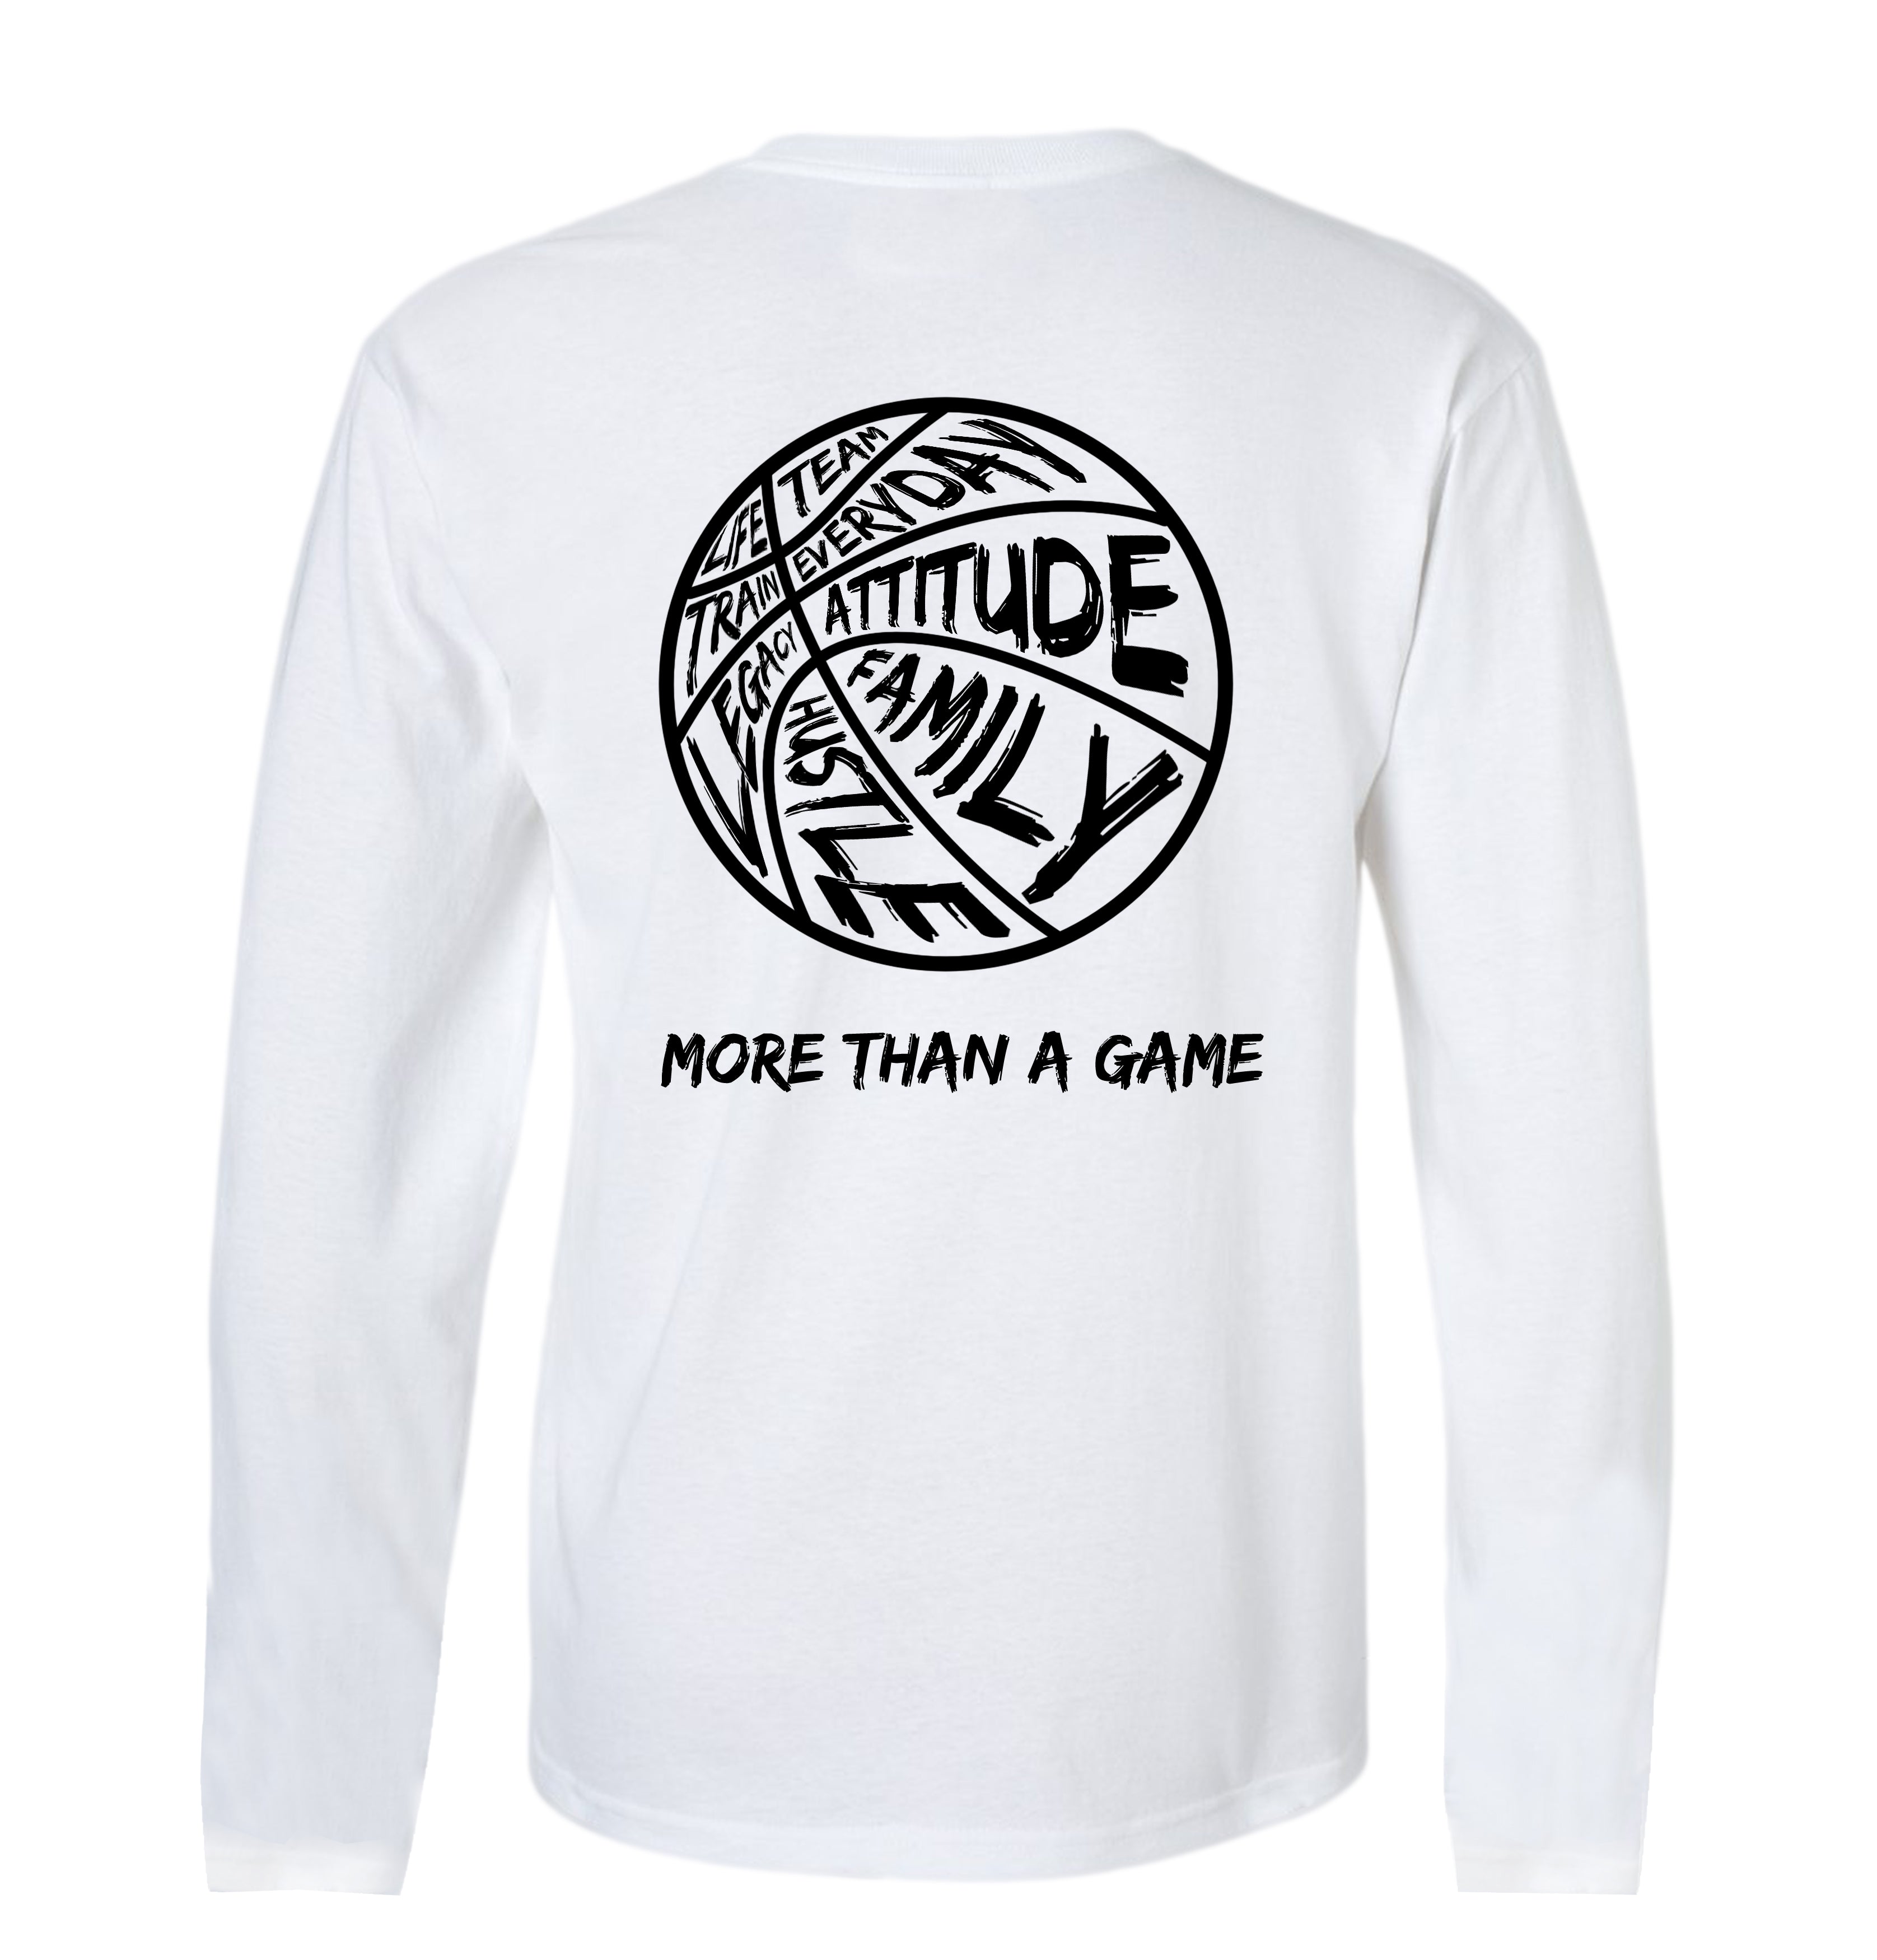 More Than A Game - Long Sleeve - White - Youth